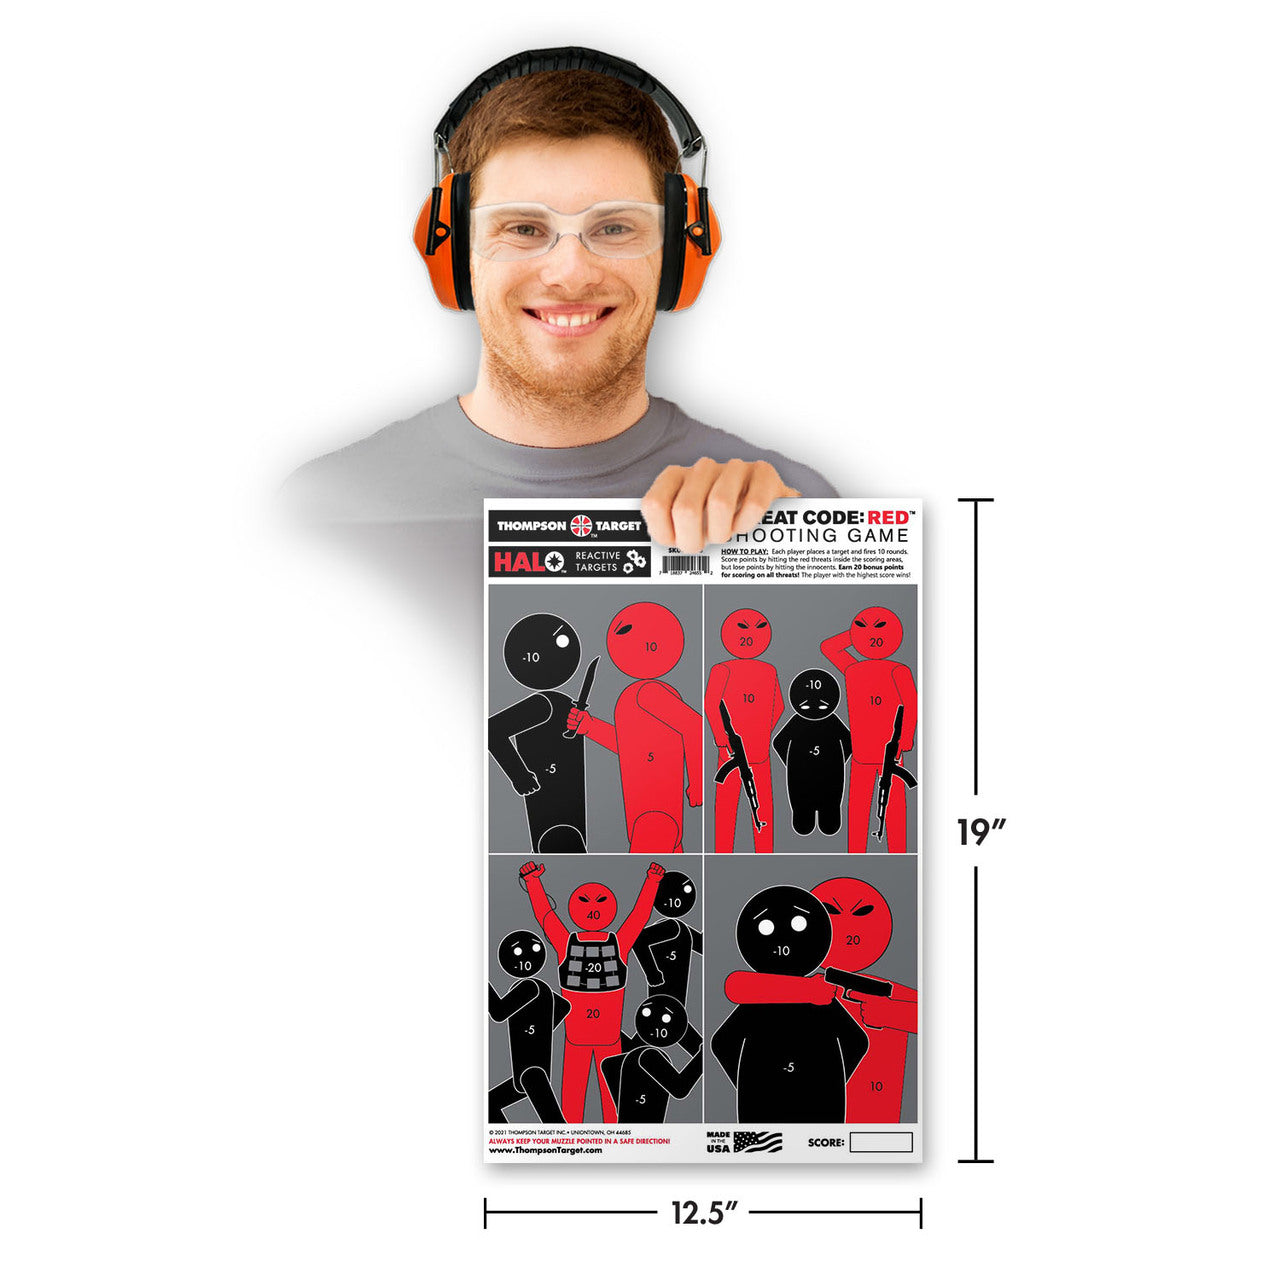 HALO Threat Code: RED - Reactive Shooting Game Targets - 12.5"x19"